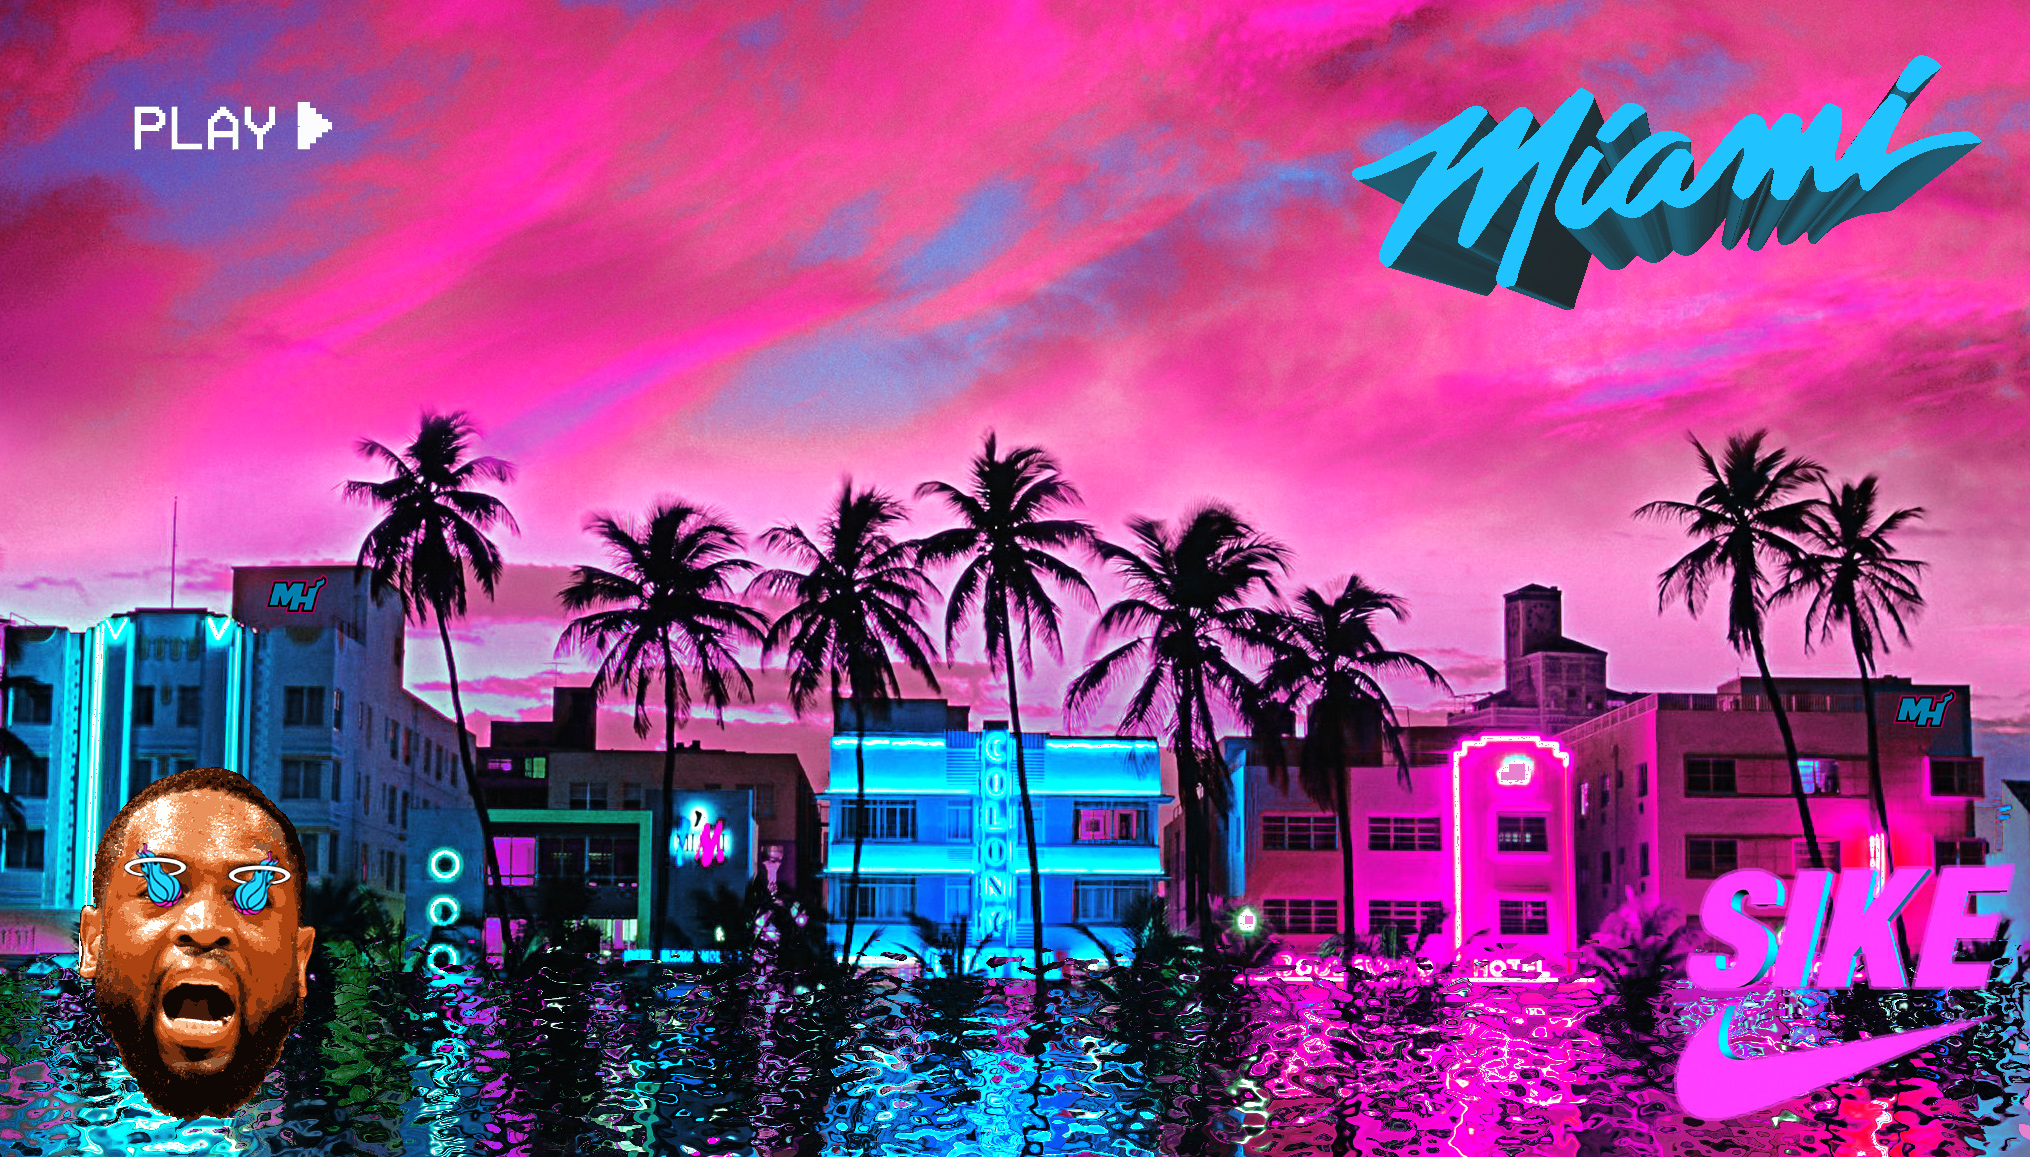 Miami Heat Vice Wallpapers